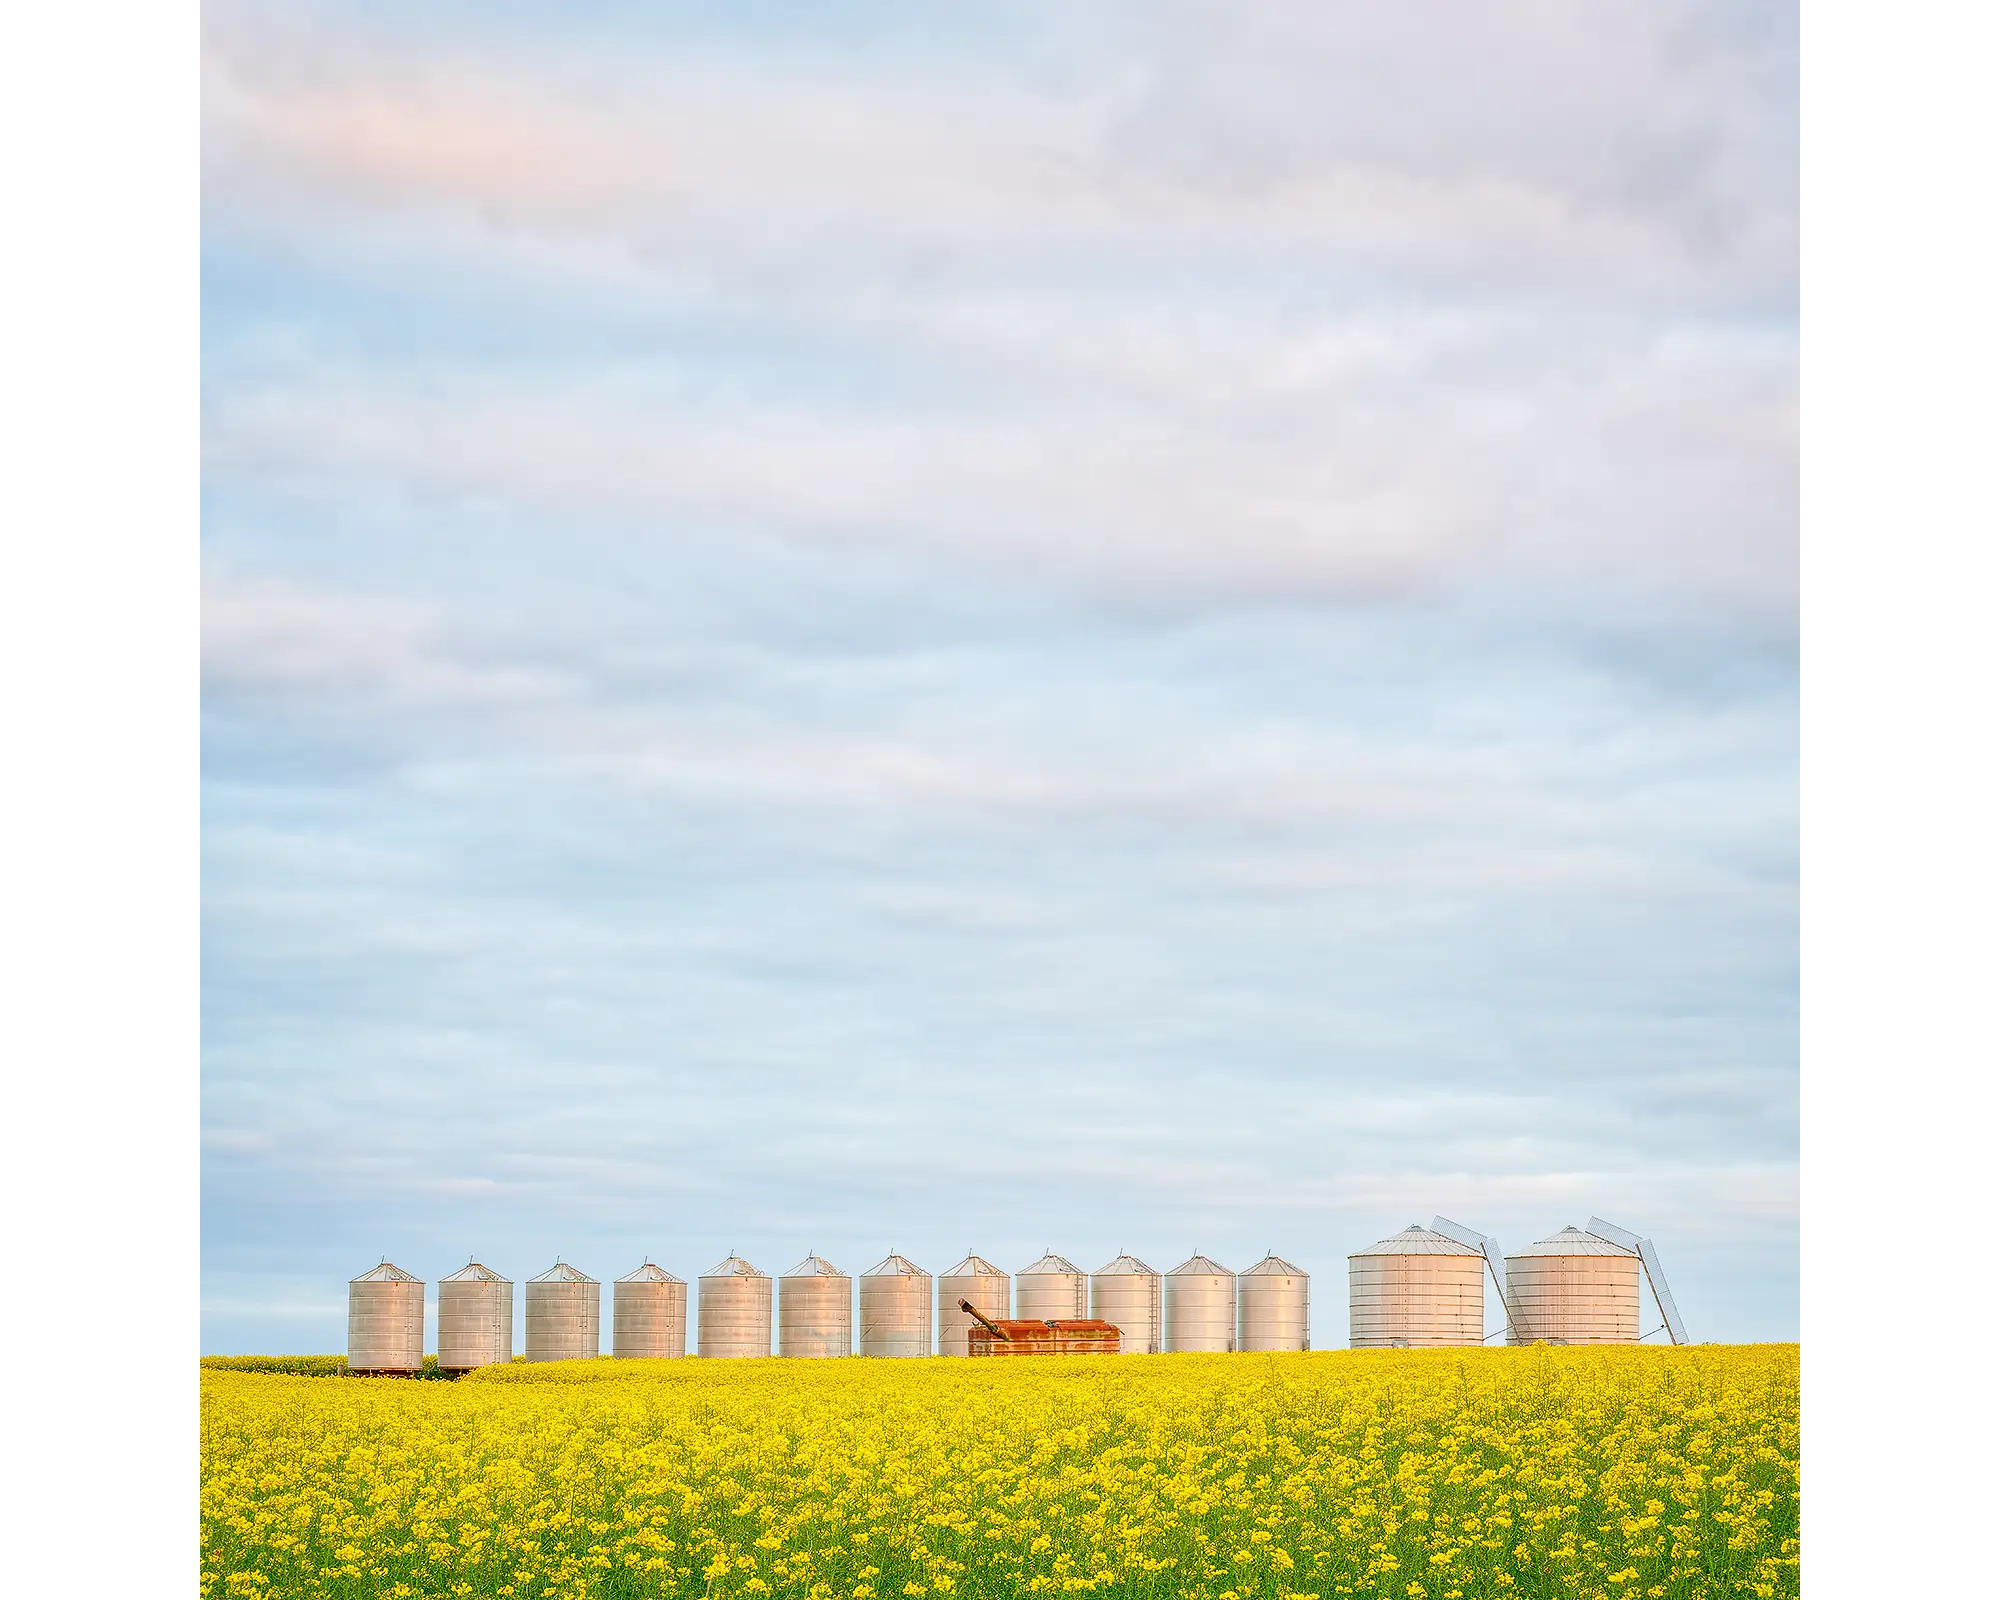 Golden Silos - sunset with canola, Junee Shire, New South Wales, Australia.